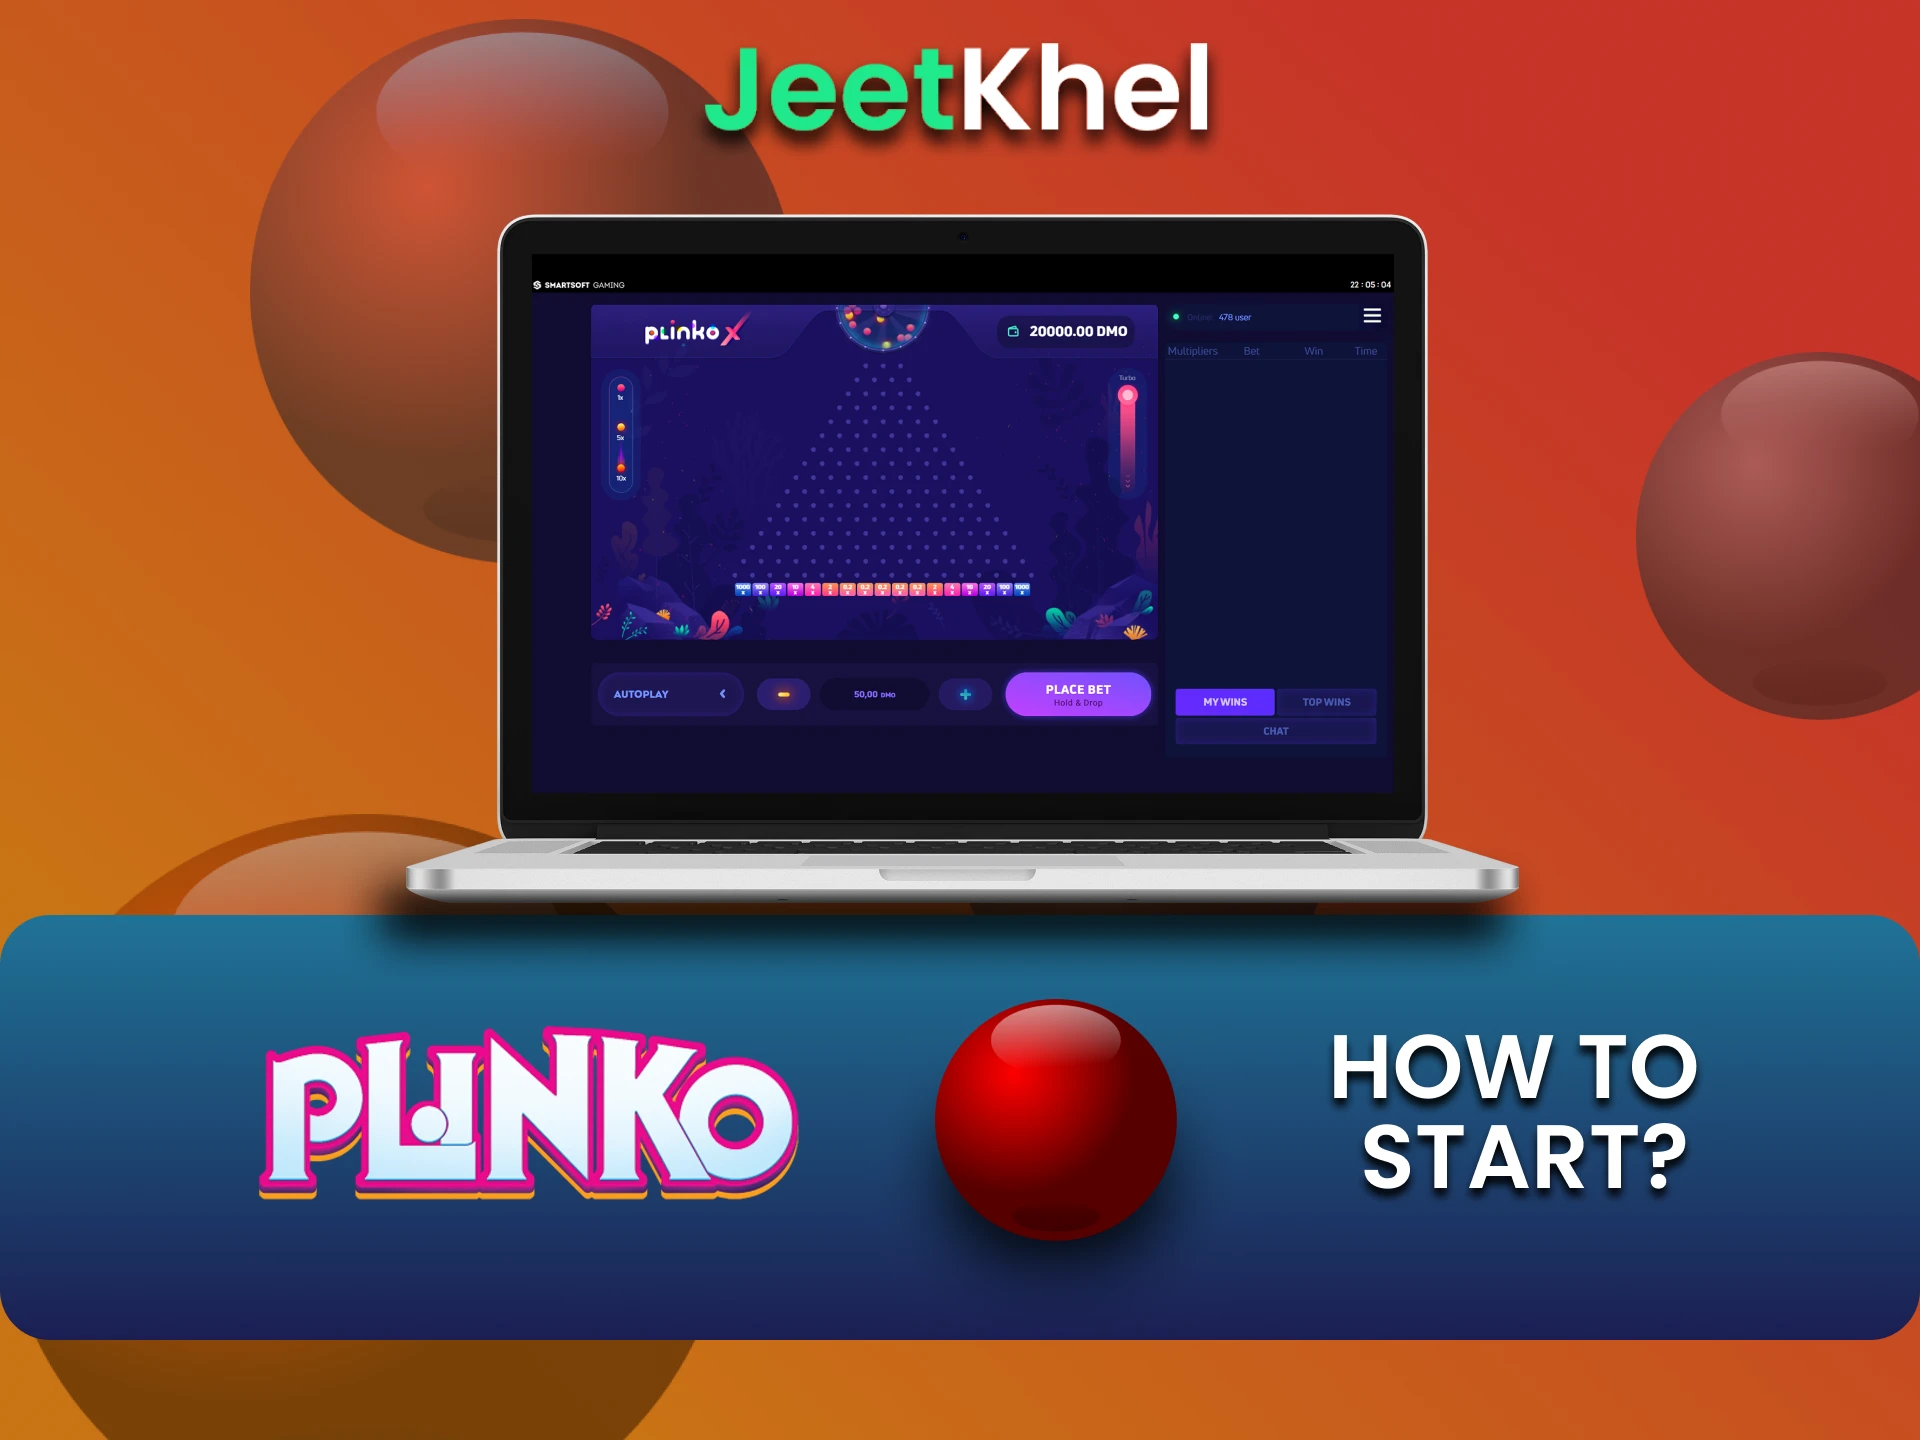 You can find Plinko in the casino section of the JeetKhel website.